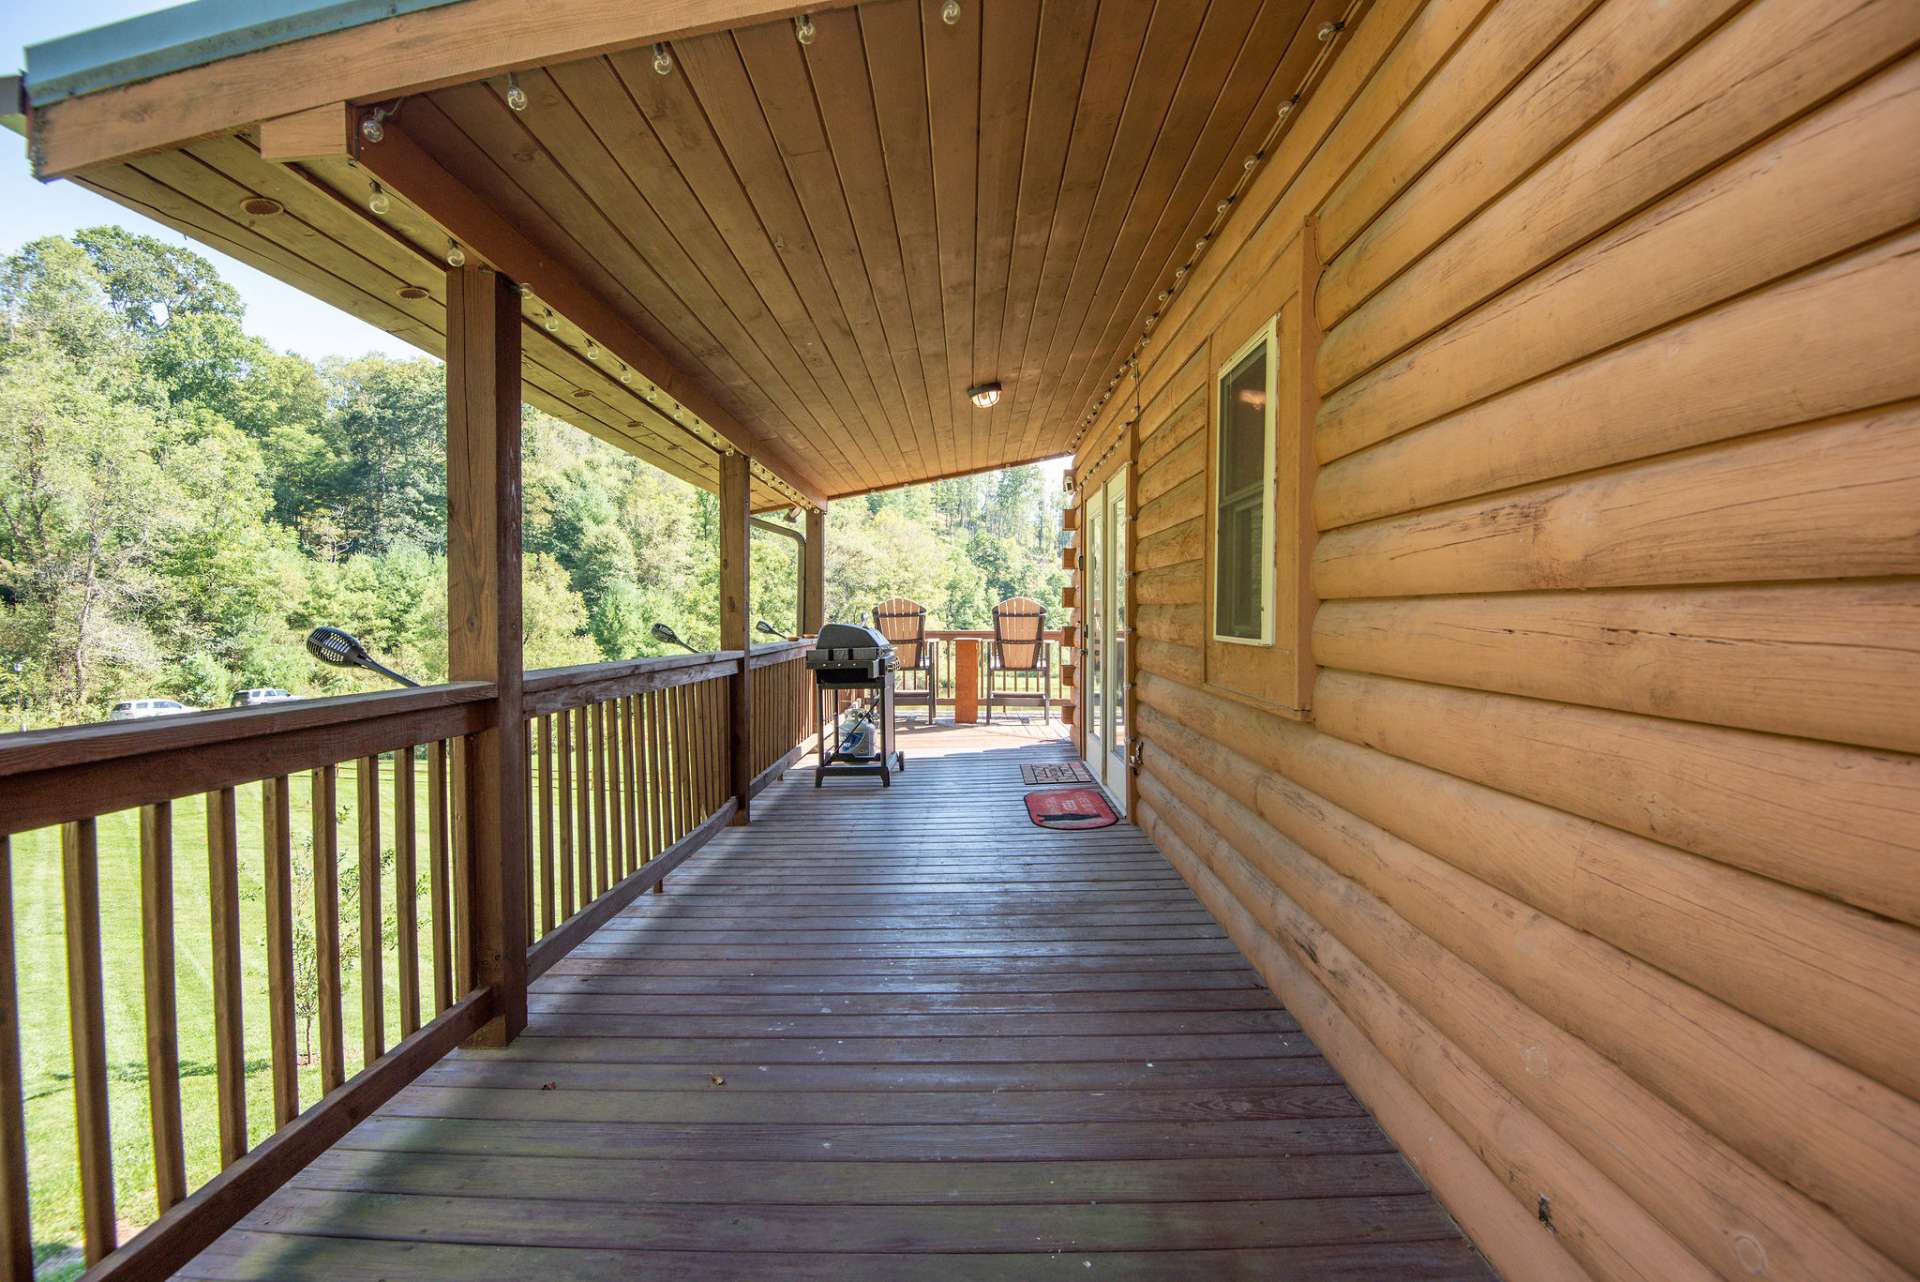 Partially covered wrap around deck for your outdoor grilling, dining, and entertaining.